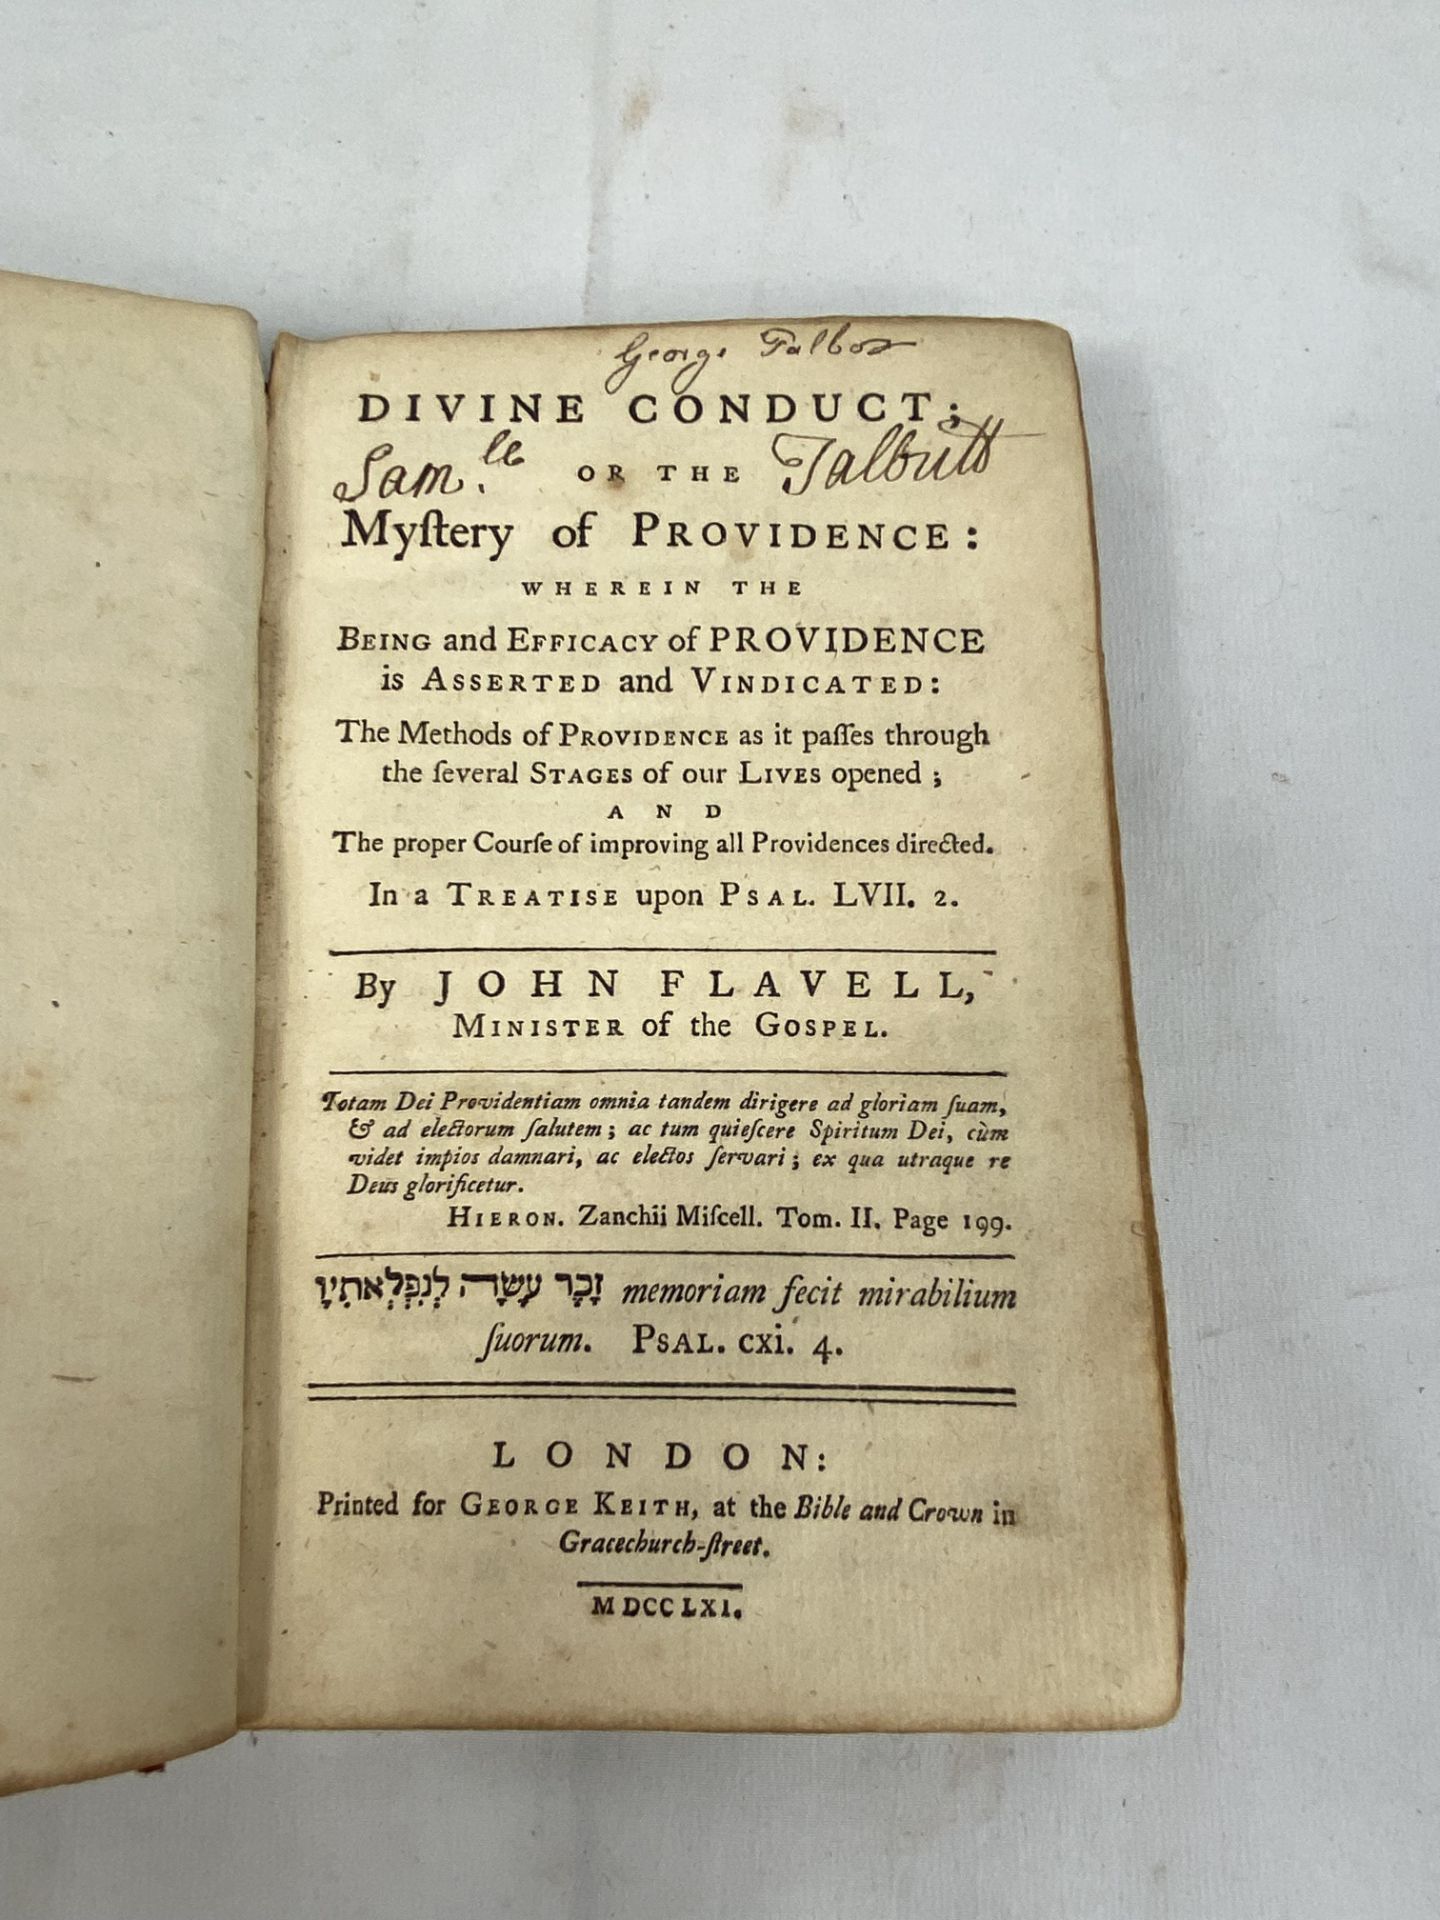 Leather bound Devine Conduct of the Mystery of Providence by John Flavell